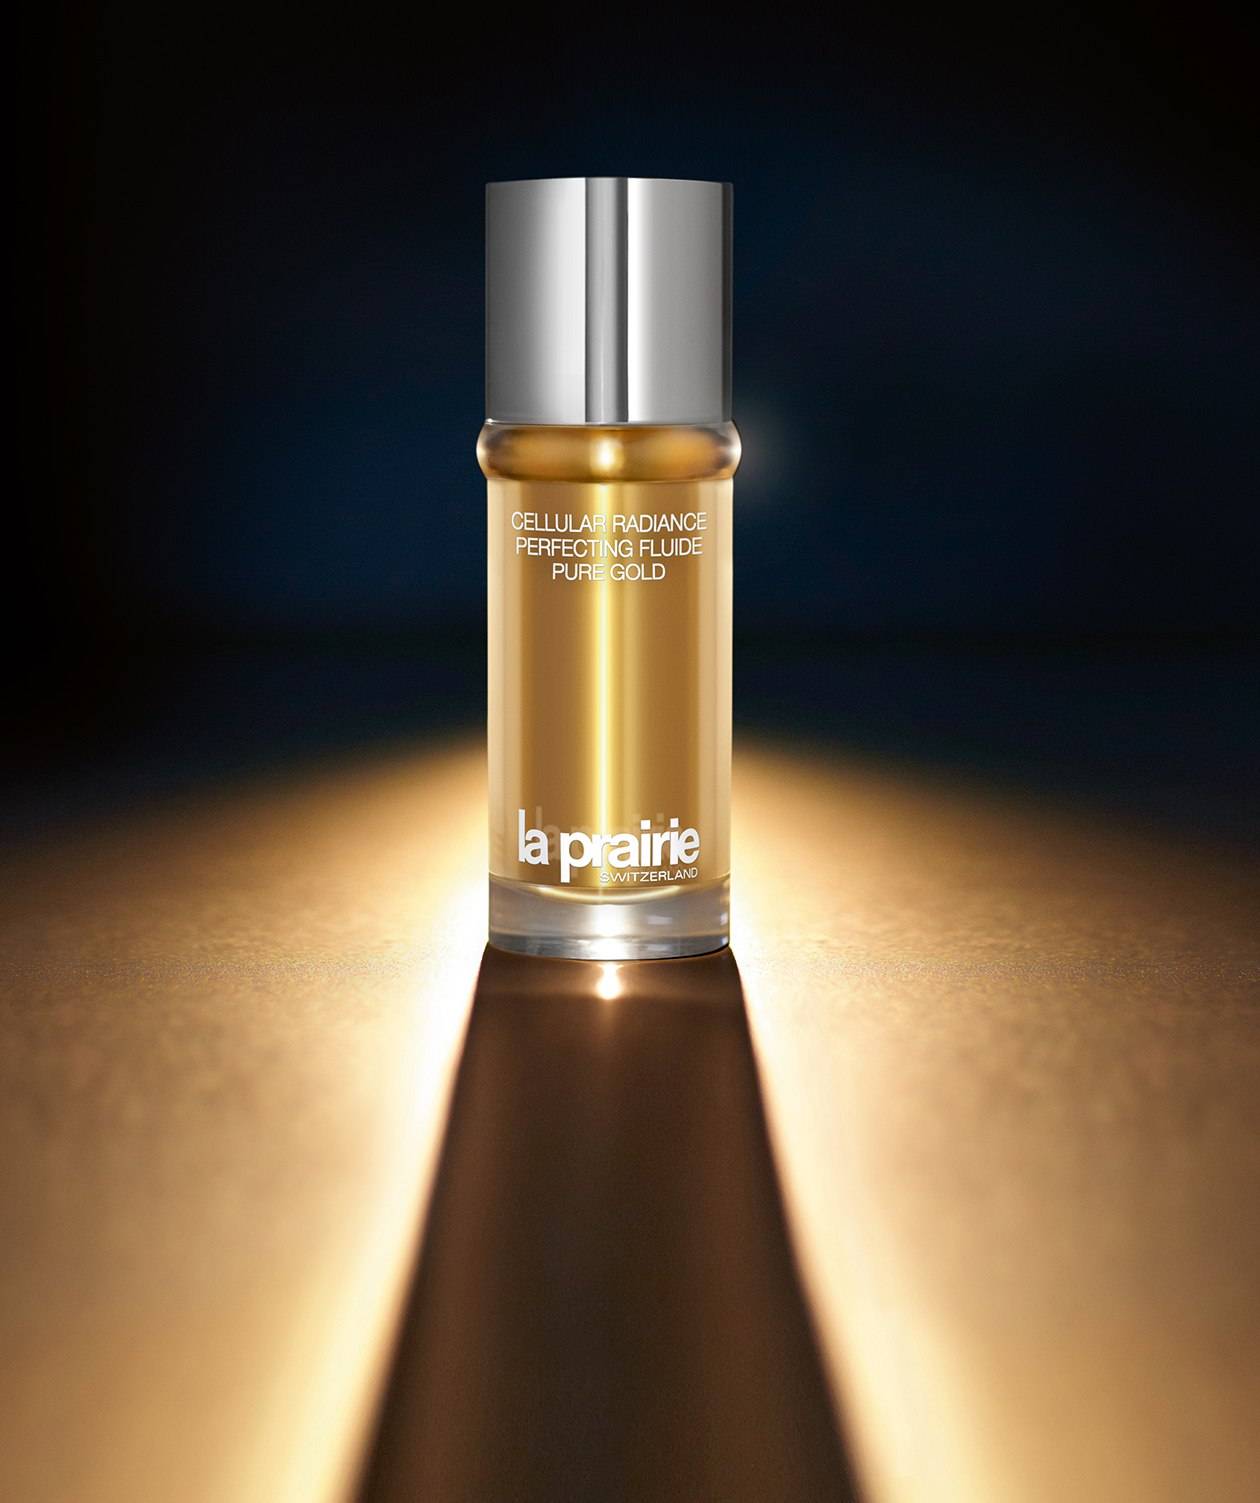 cellular-radiance-perfecting-fluide-pure-gold_mood-closed-e1453834714526